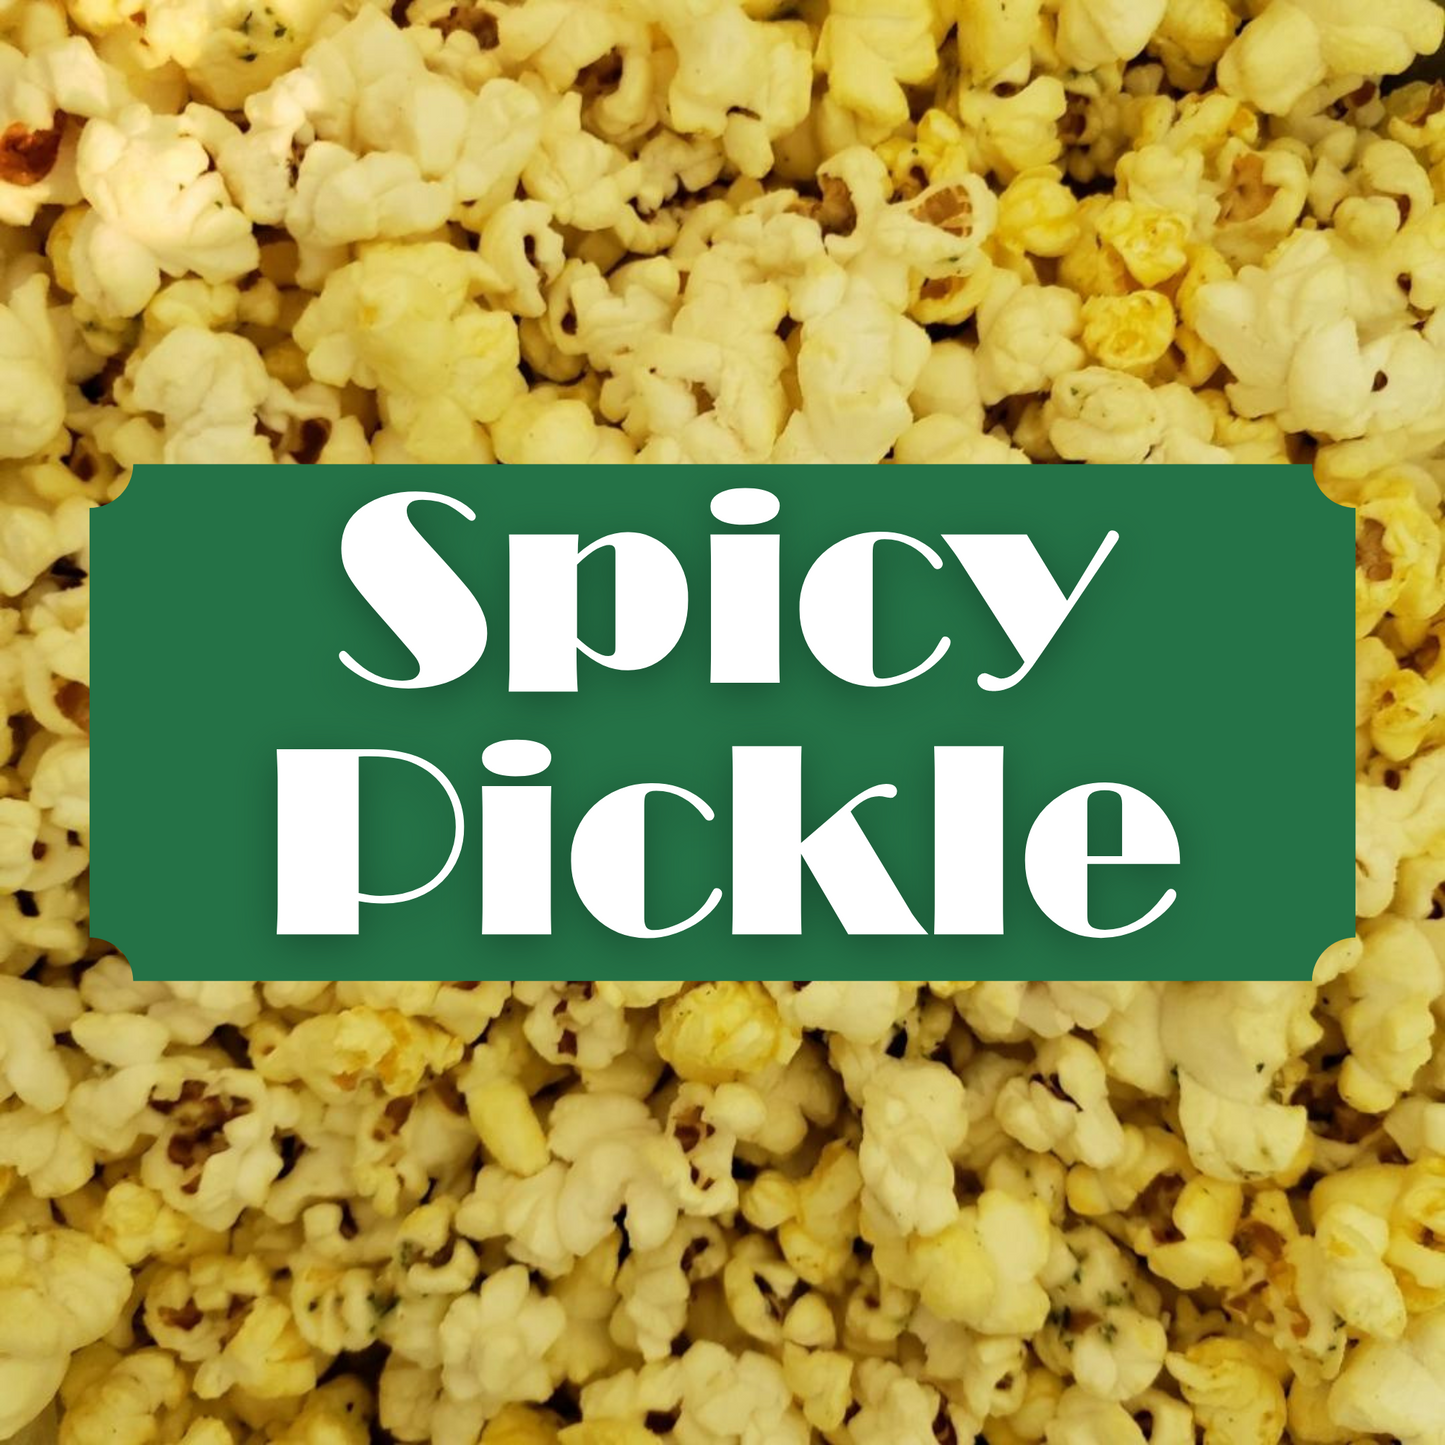 Spicy Pickle Popcorn Large Bags - Case of 8 ($2.99ea)